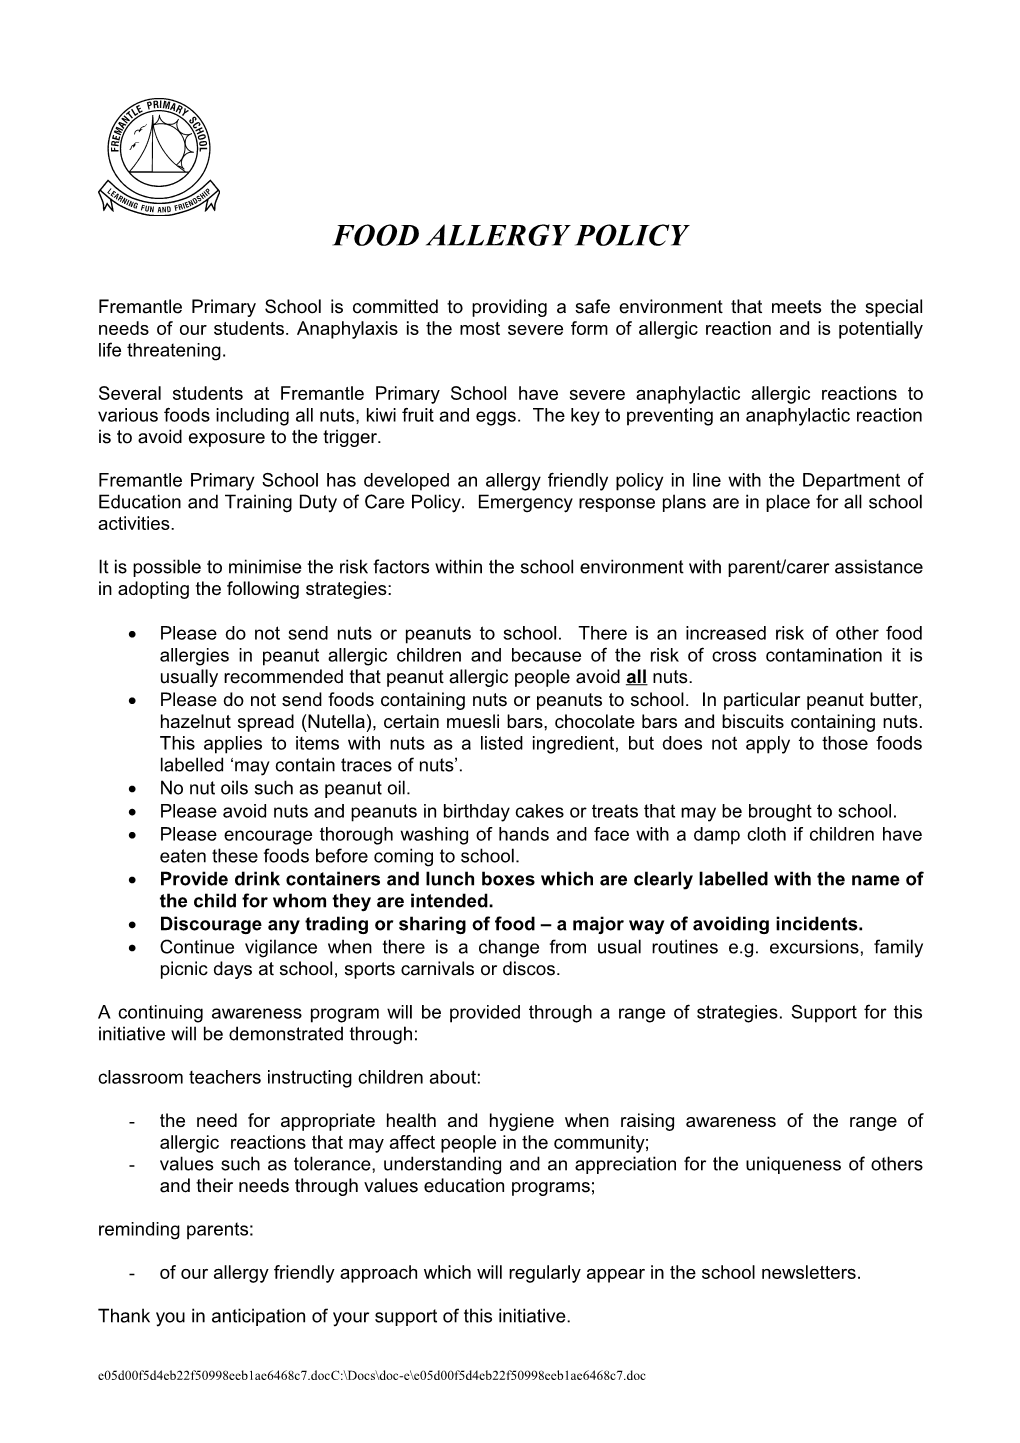 Food Allergy Policy